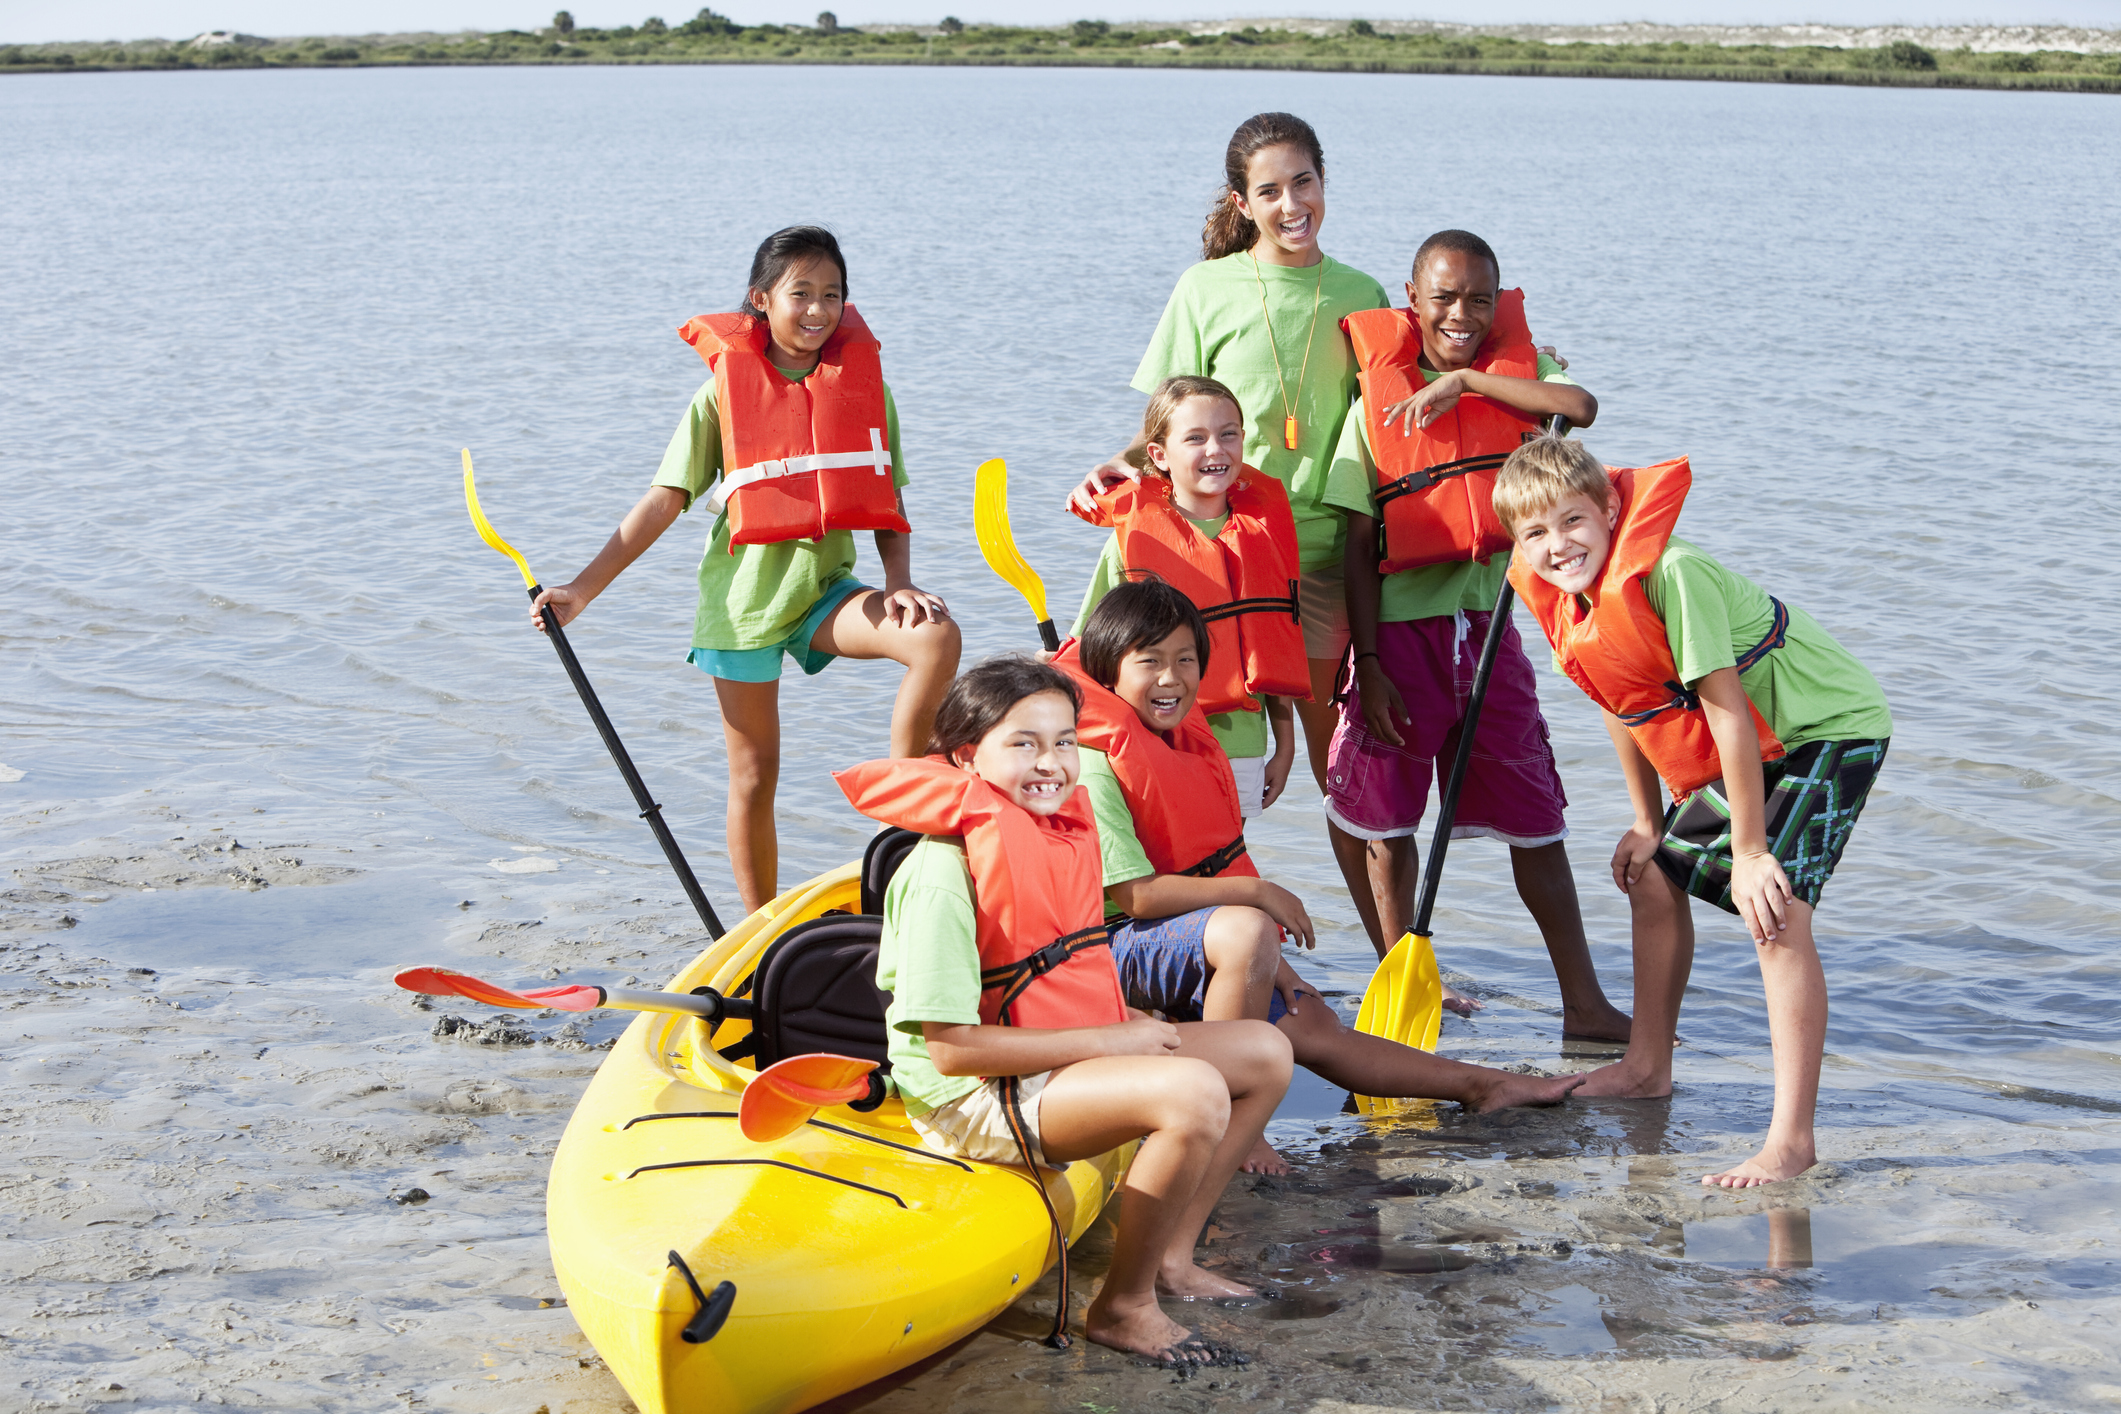 Teenage girl and group of children with kayak at water sports camp.